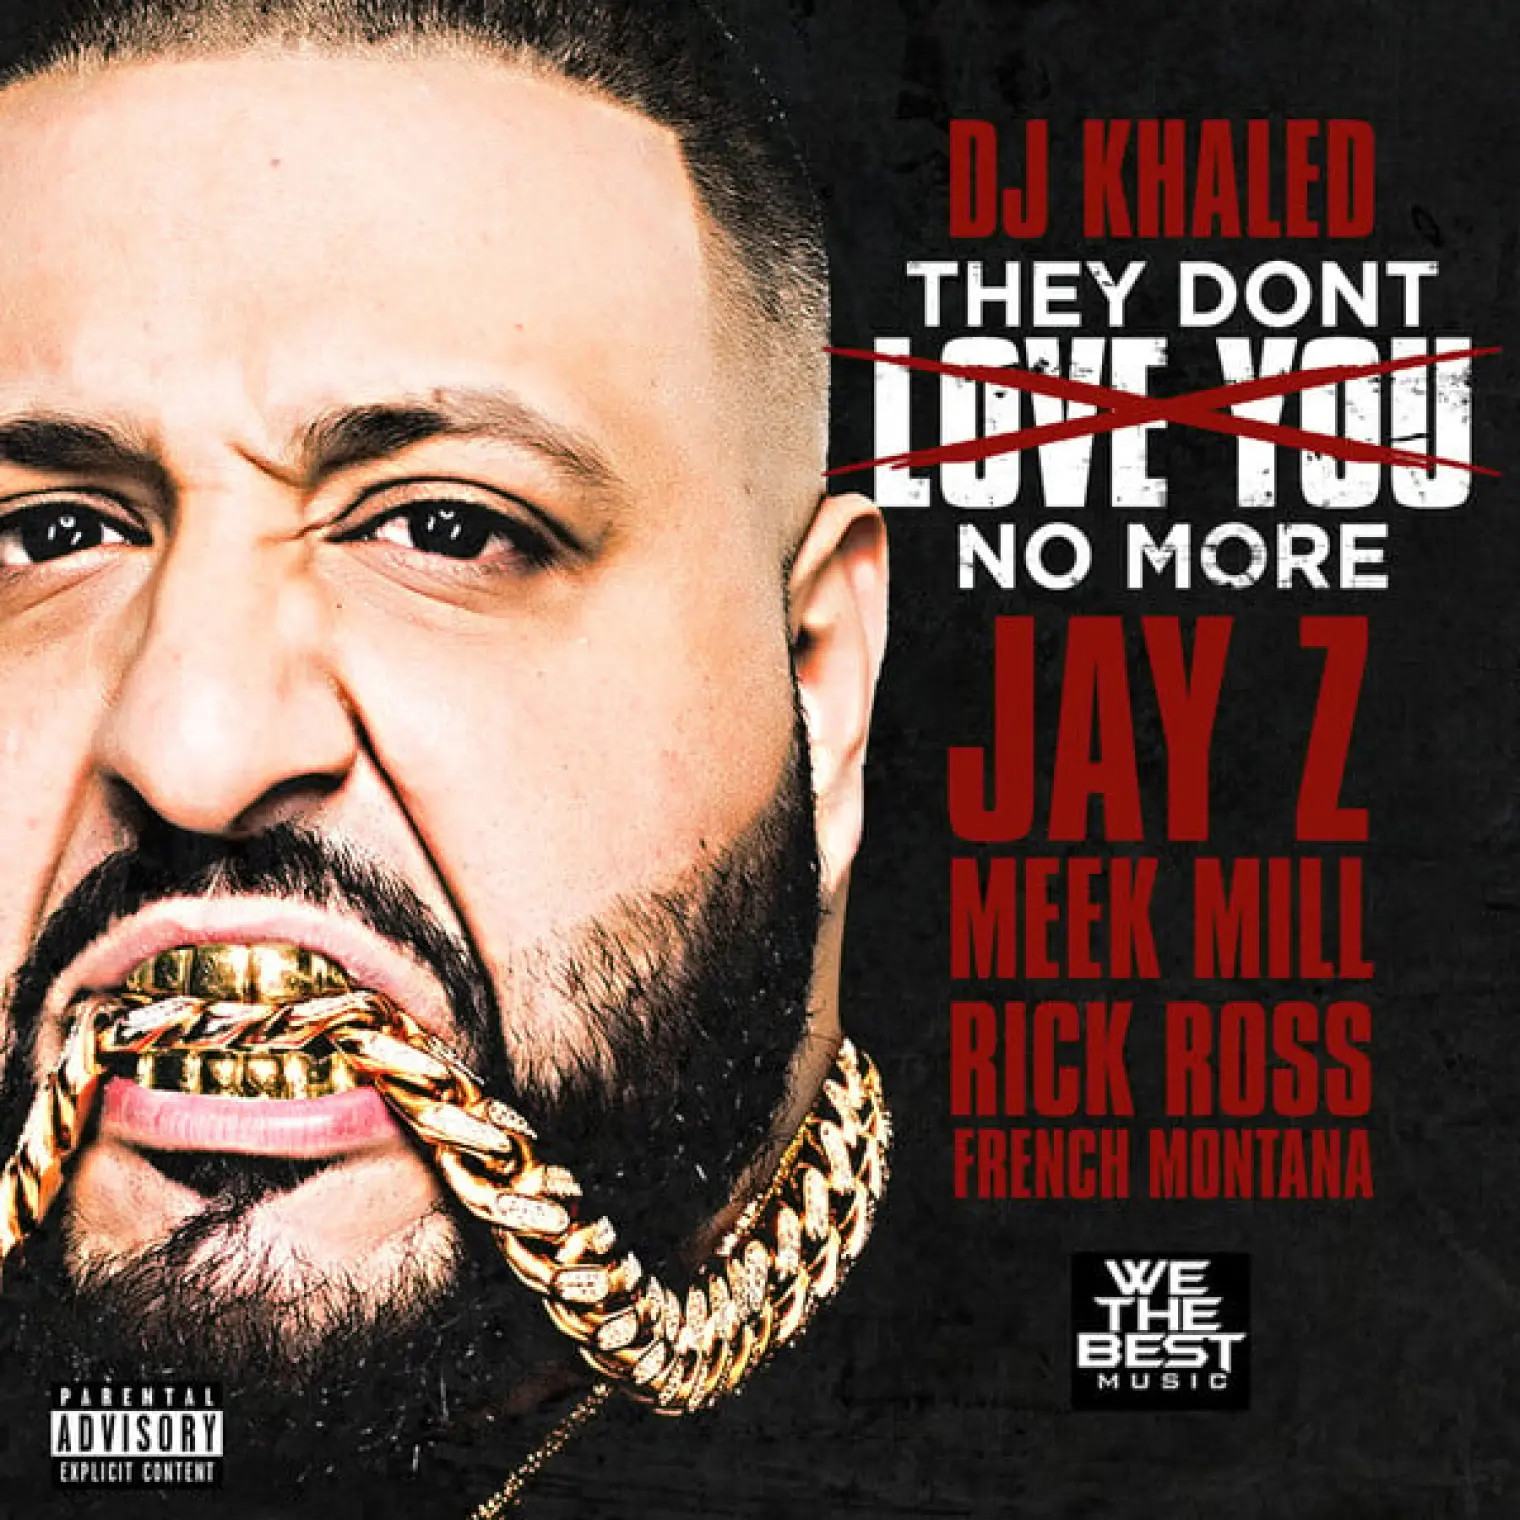 They Don't Love You No More (feat. Jay Z, Meek Mill, Rick Ross & French Montana) -  DJ Khaled 